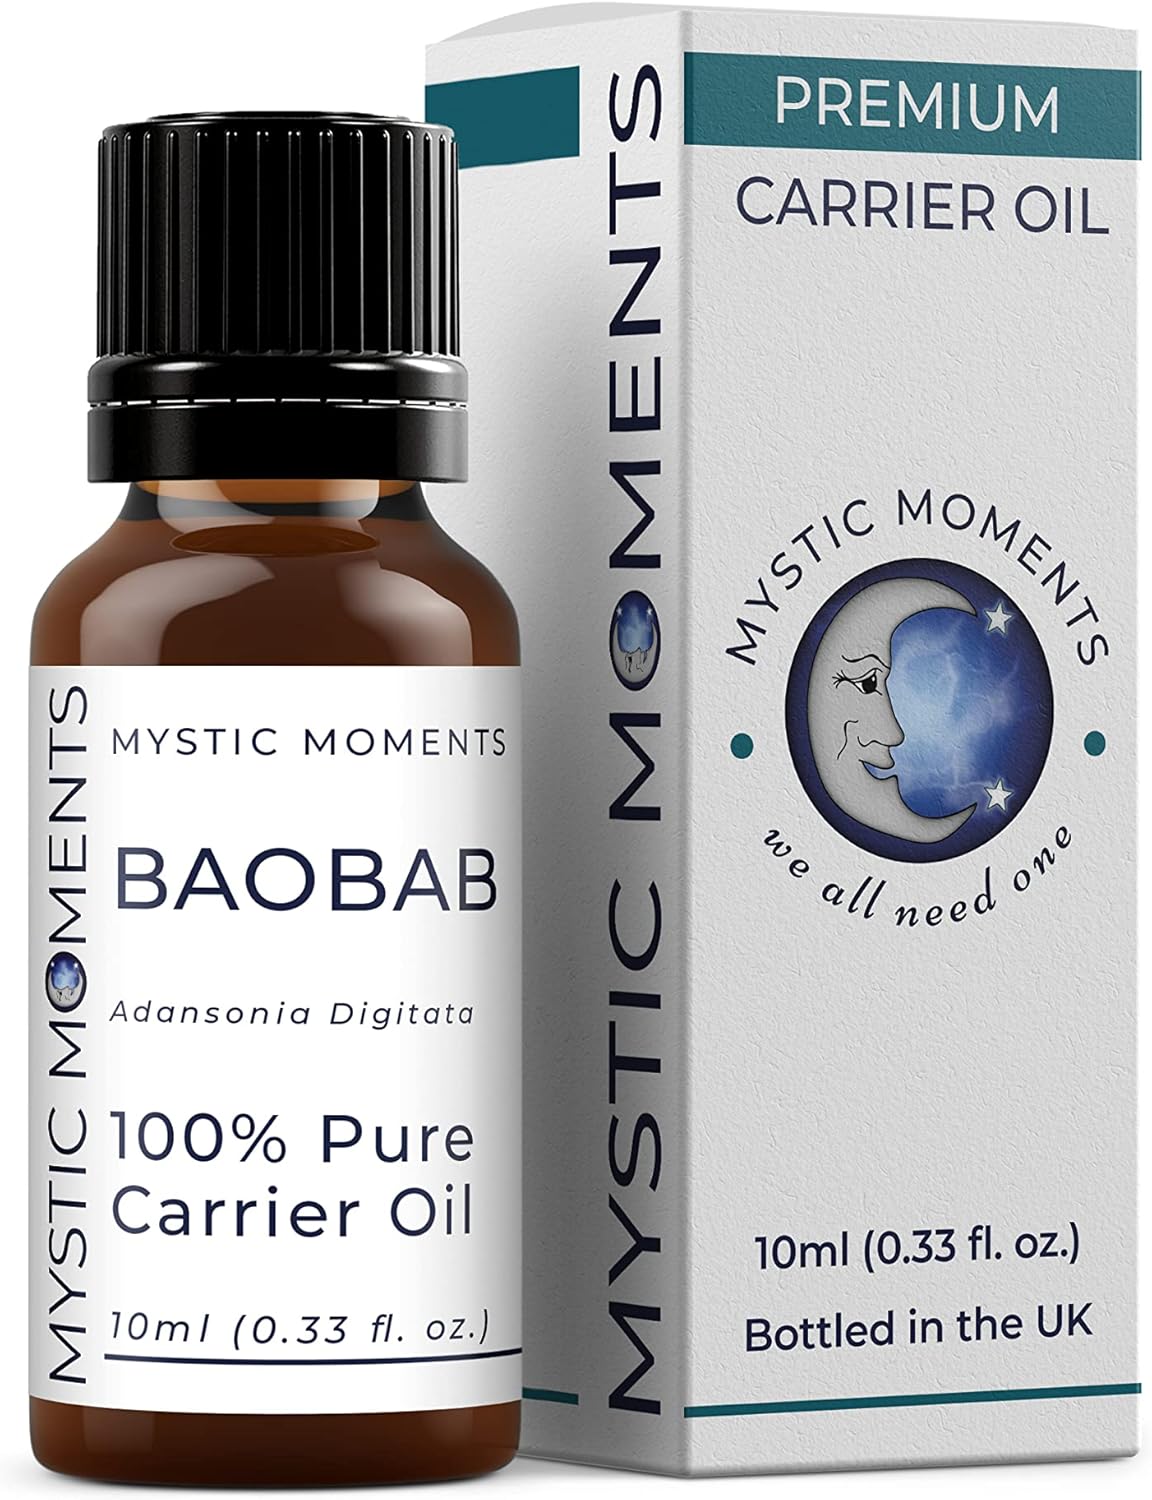 Mystic Moments | Baobab Virgin Carrier Oil 10ml - Pure & Natural Oil Perfect for Hair, Face, Nails, Aromatherapy, Massage and Oil Dilution Vegan GMO Free